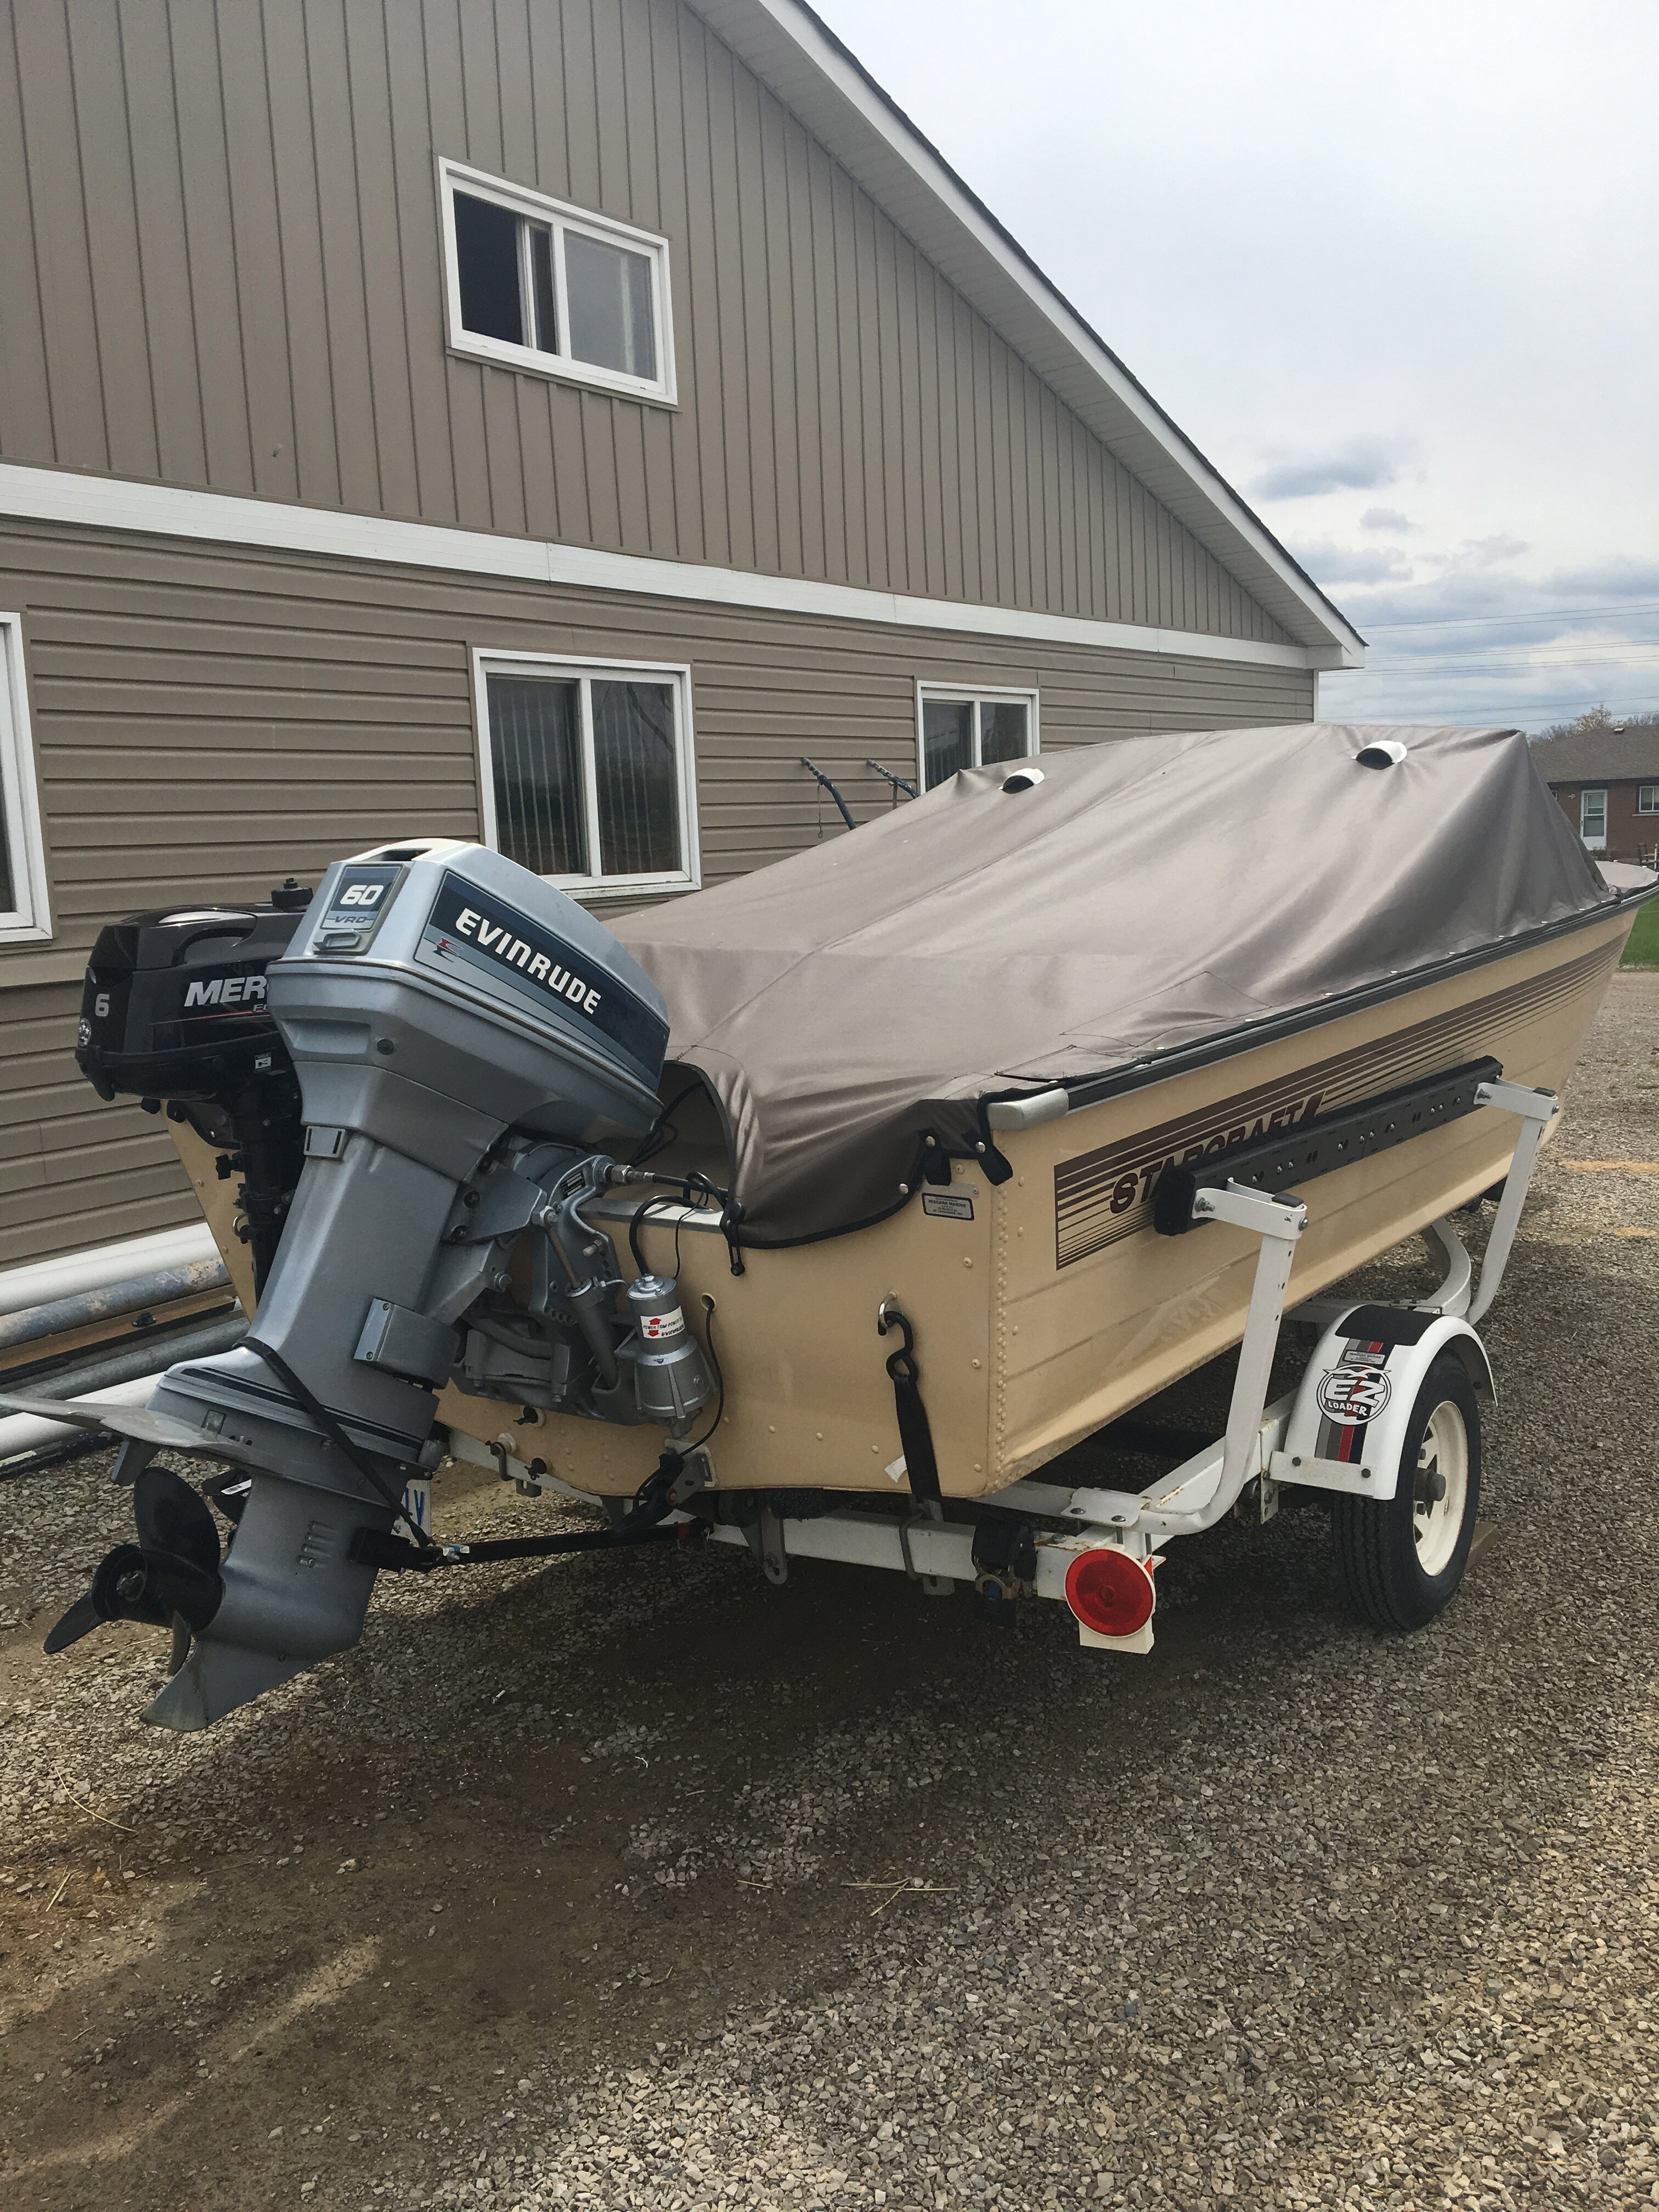 16' Starcraft fishing boat with Evinrude VRO 50 hp Outboard Motor